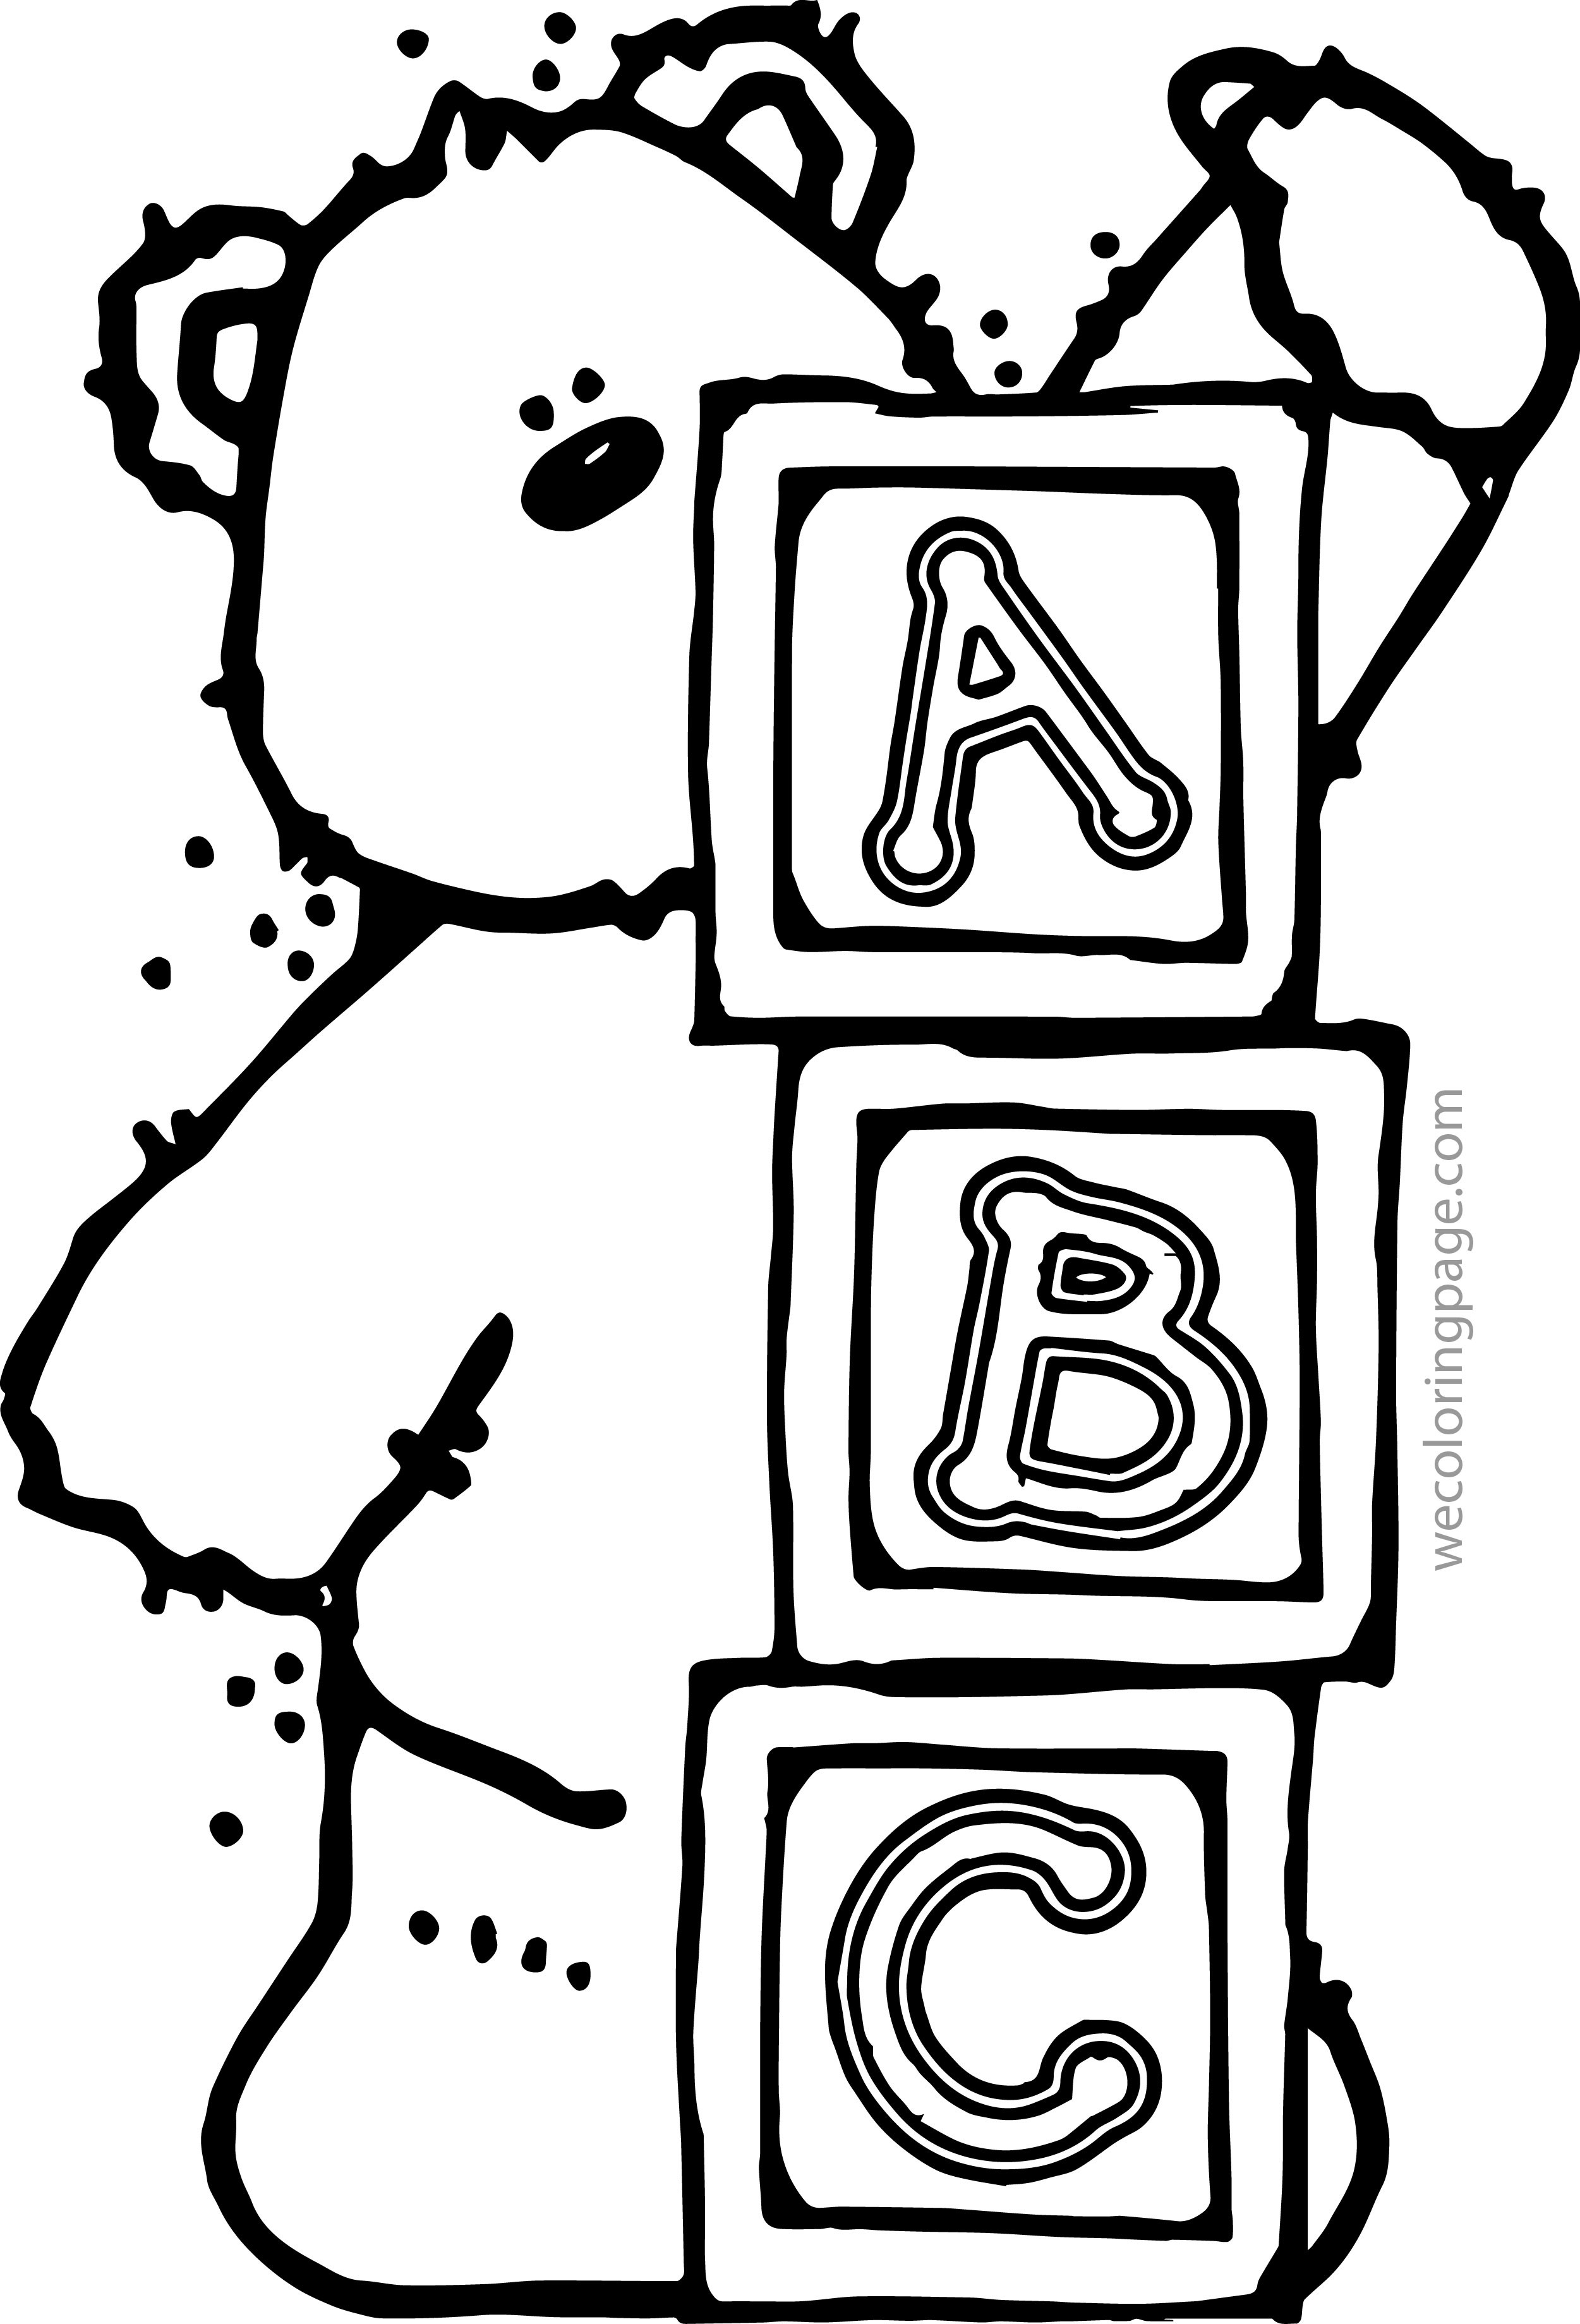 Coloring Sheets For Girls Abc Coloring Sheets
 Greek Letter Coloring Pages Format Alphabet For Kids Amp